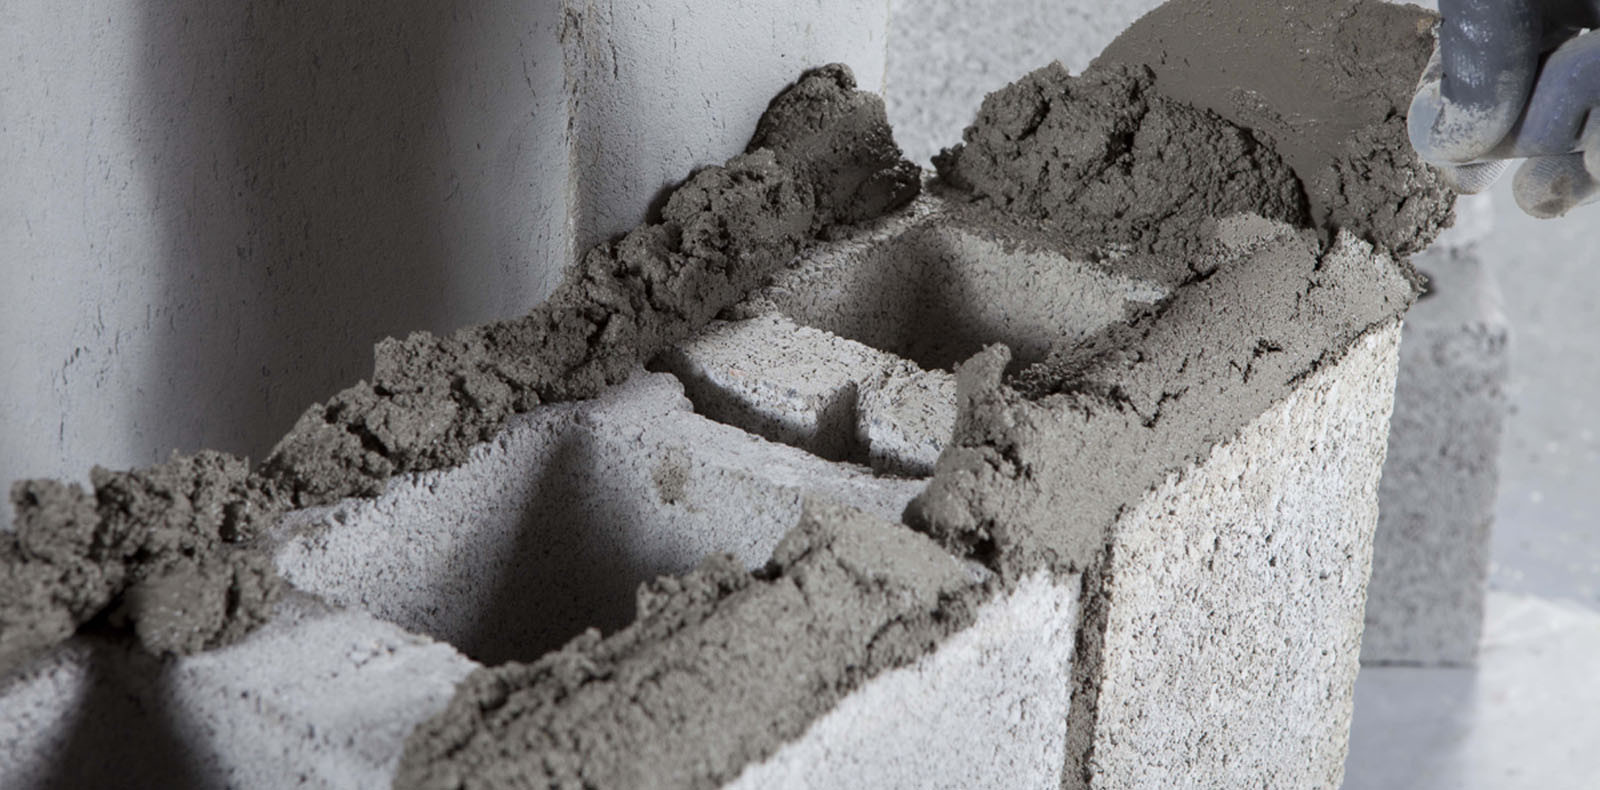 How to Make Concrete - This Old House